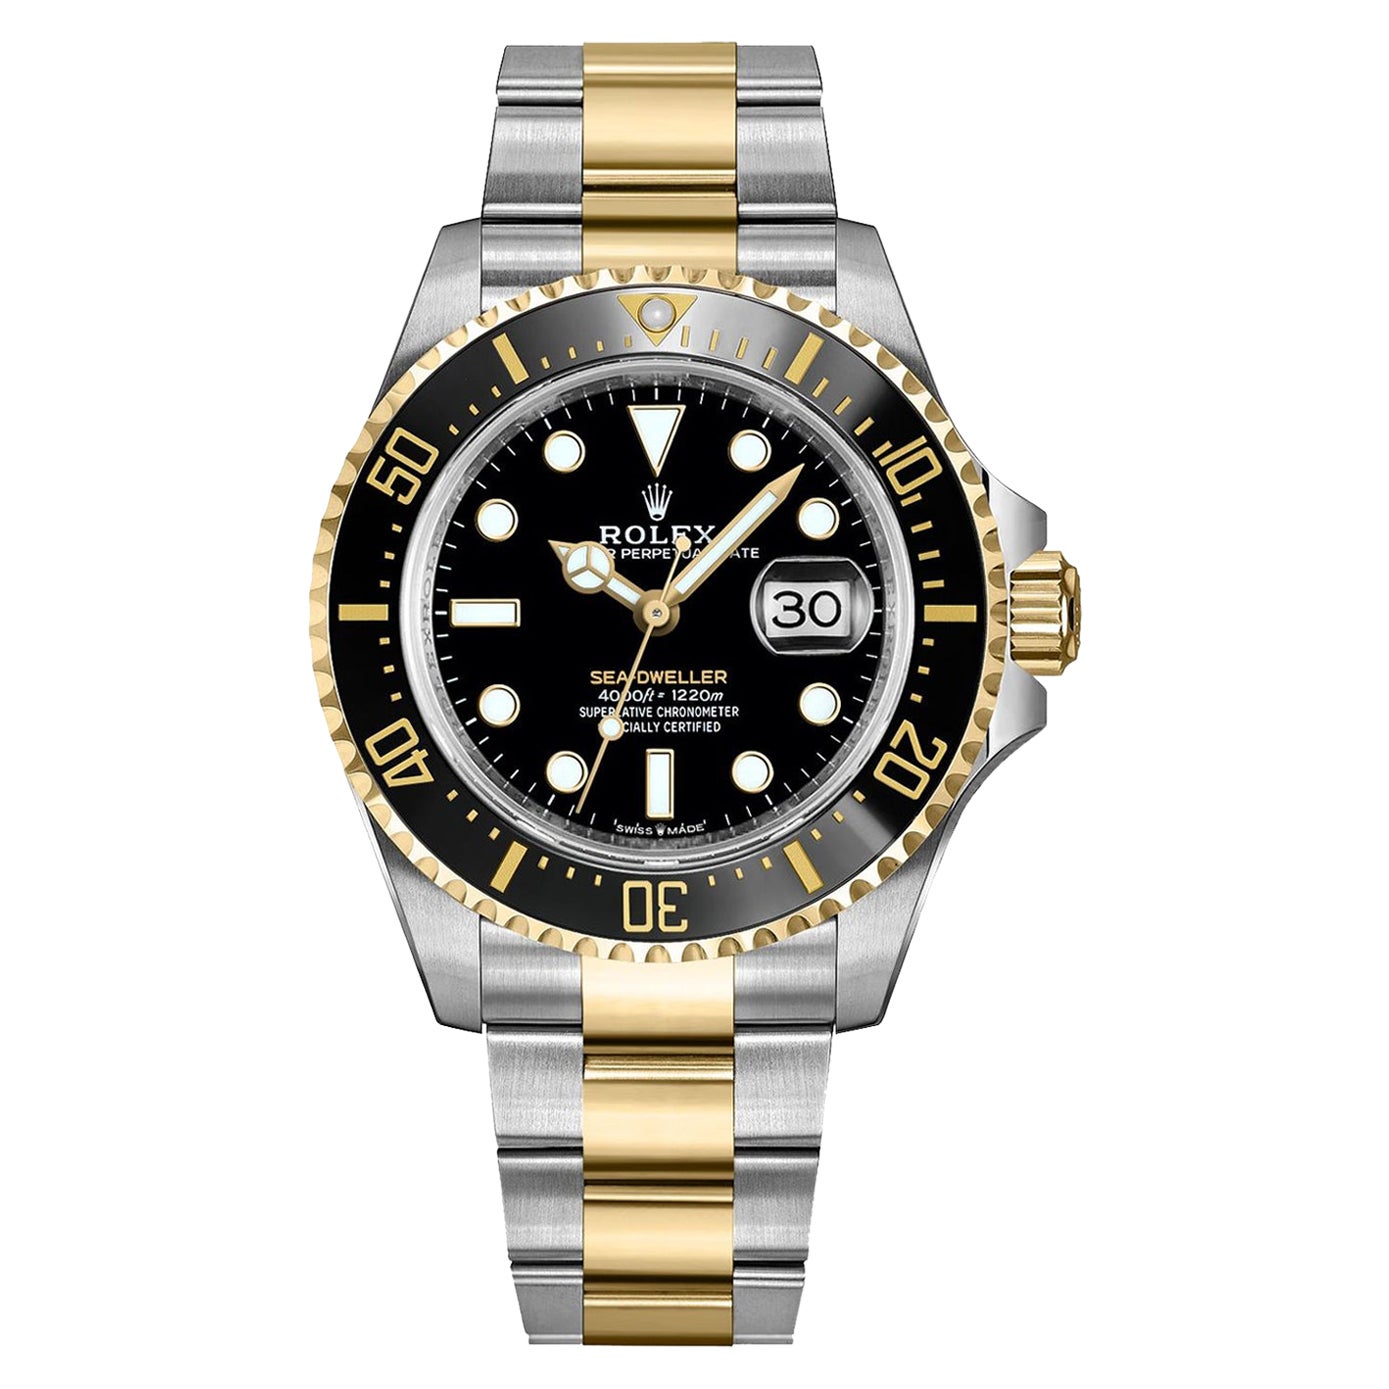 Rolex Sea-Dweller Auto Two-Tone Stainless Steel Mens Watch Date 126603